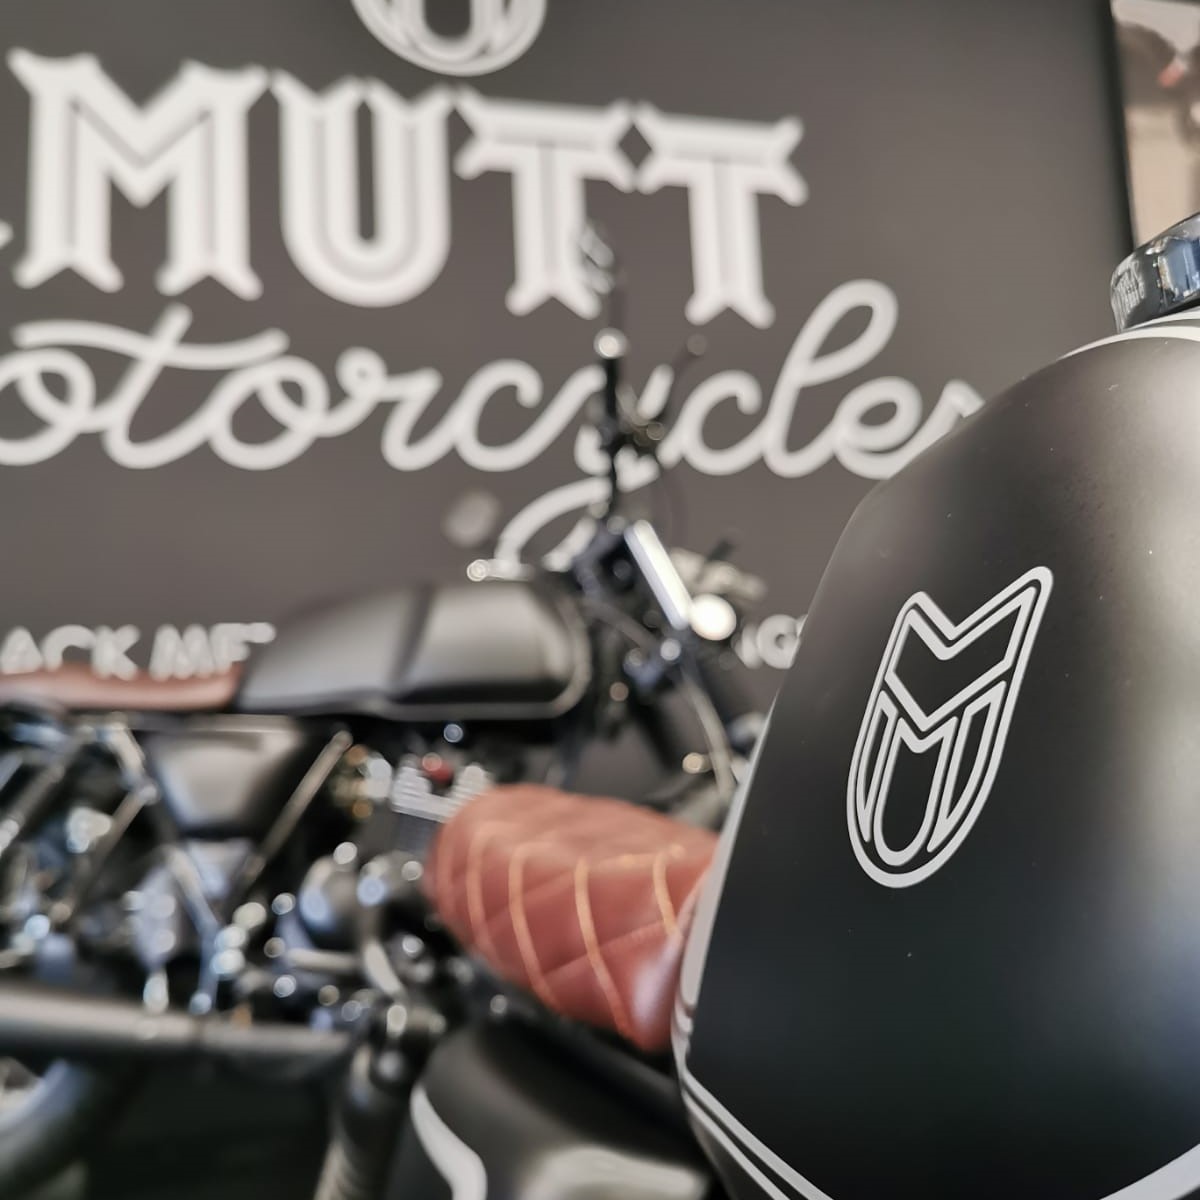 Brand new Mutt Motorcycles area in our showroom at Laguna Motorcycles in Maidstone